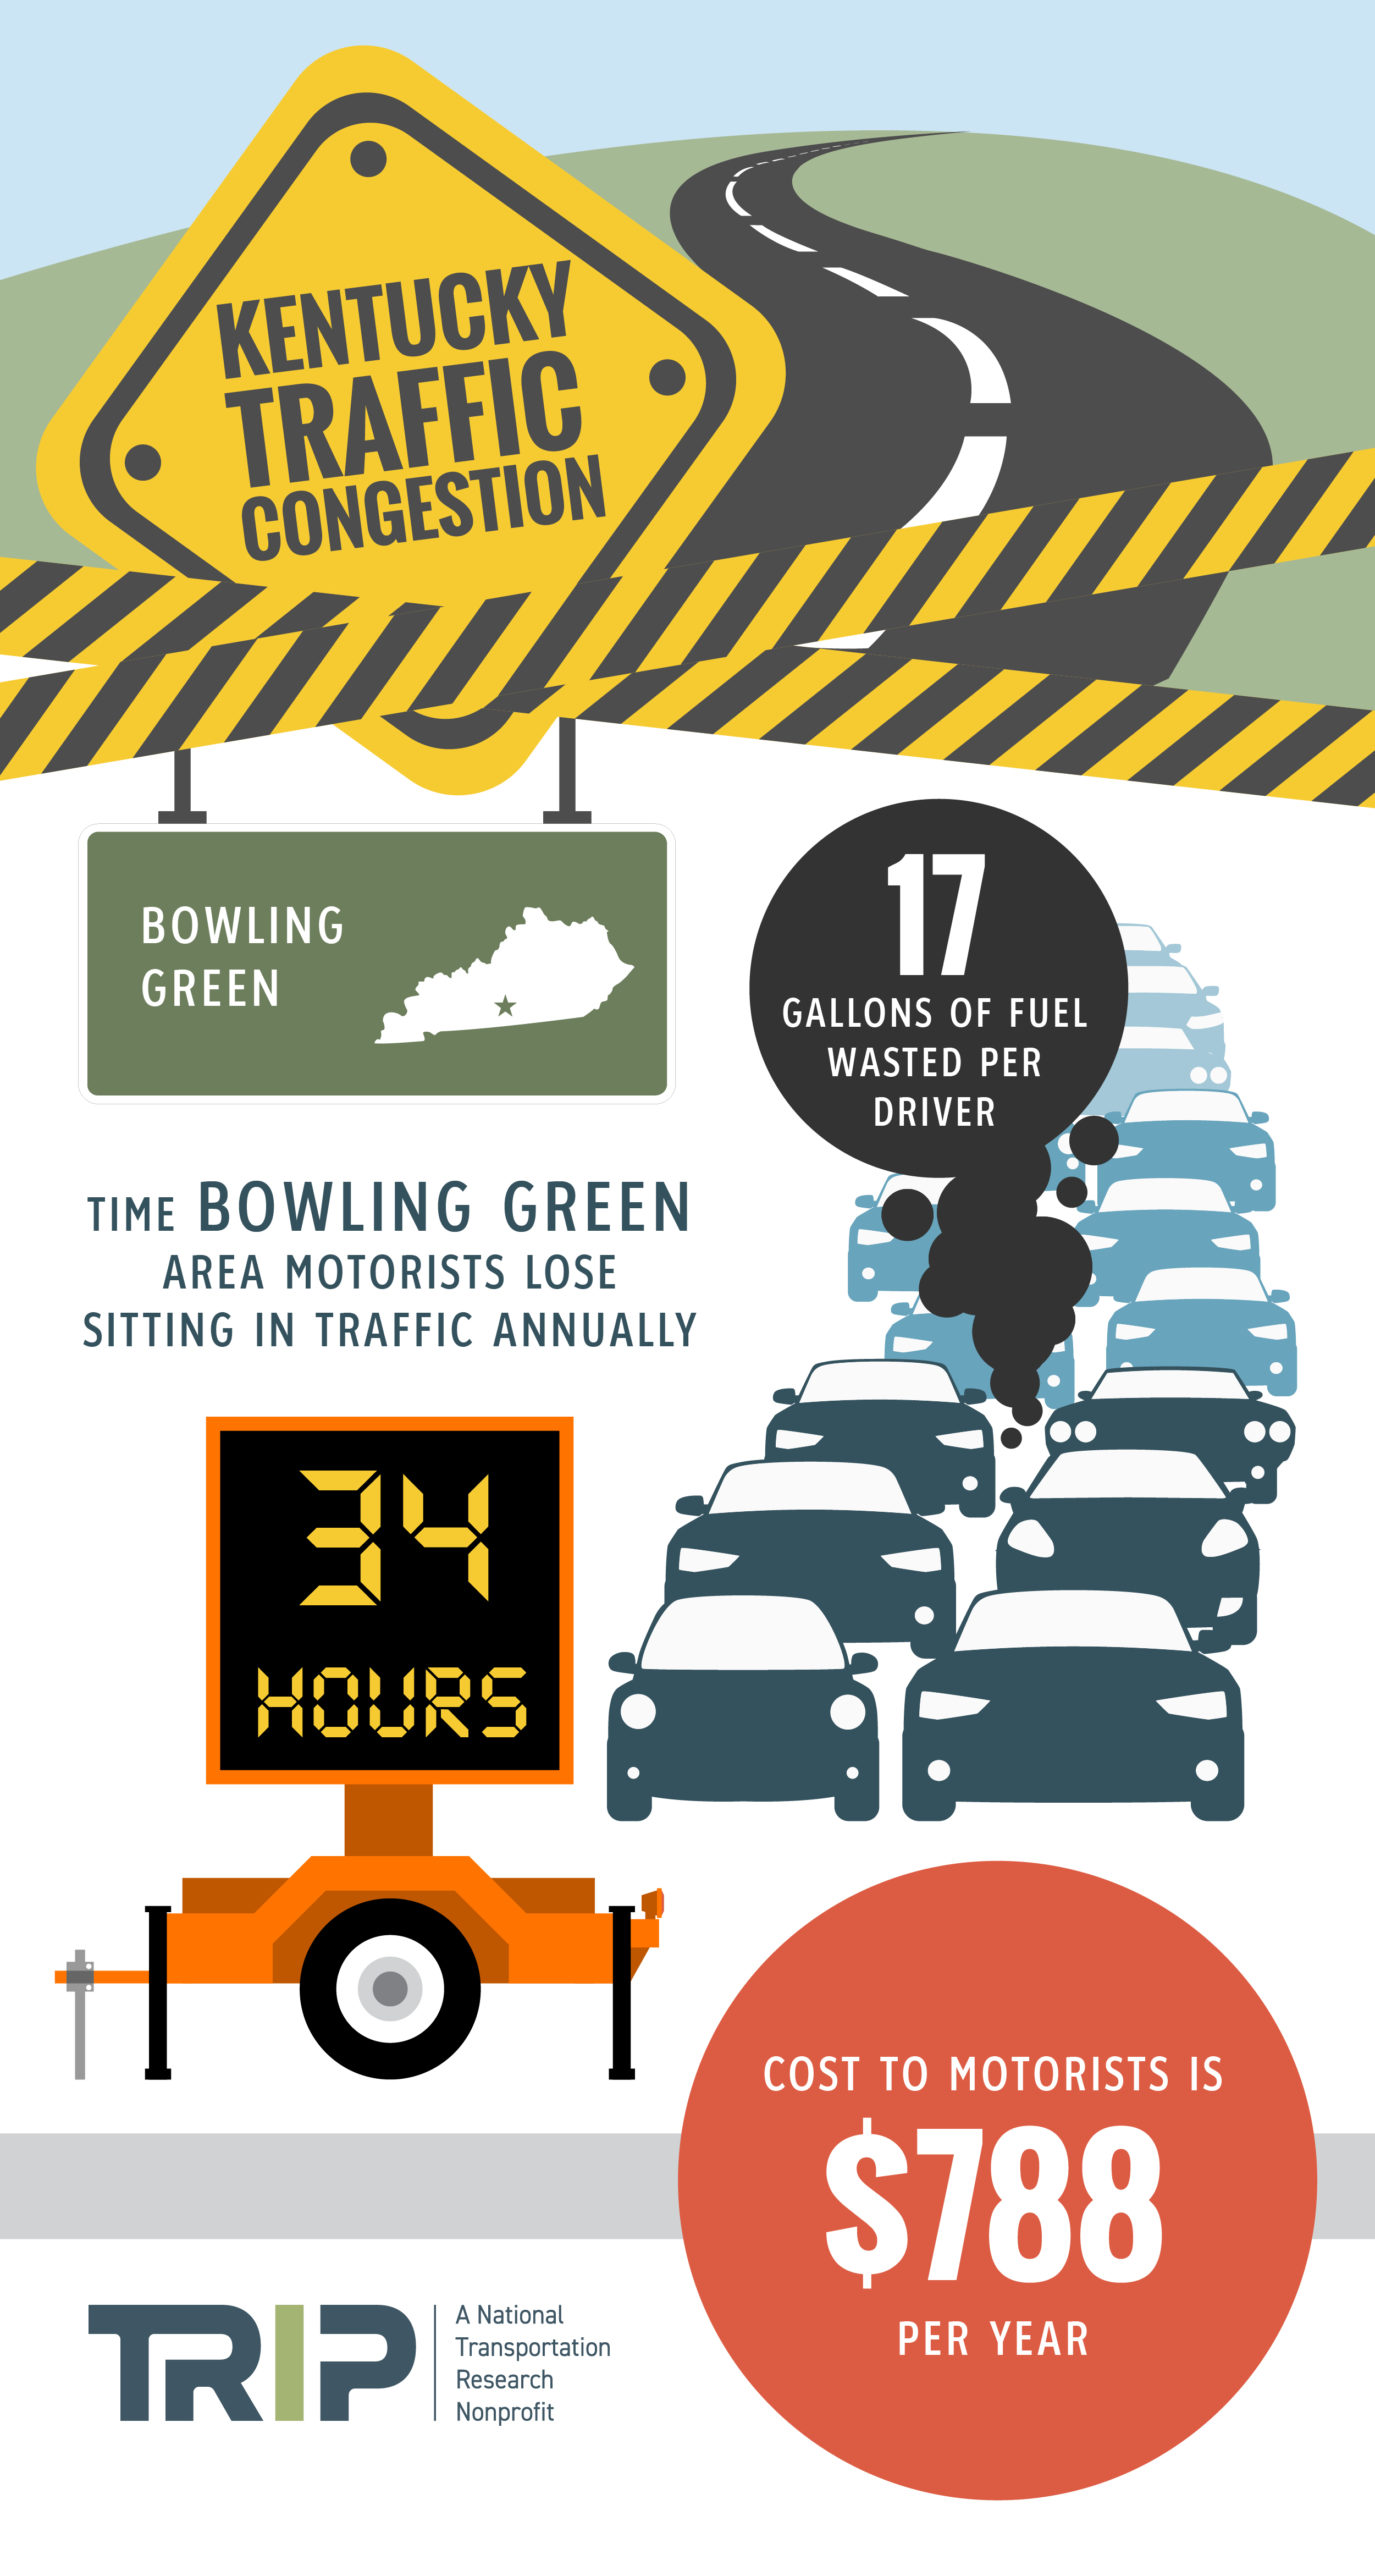 Bowling Green Traffic Congestion Infographic – February 2022